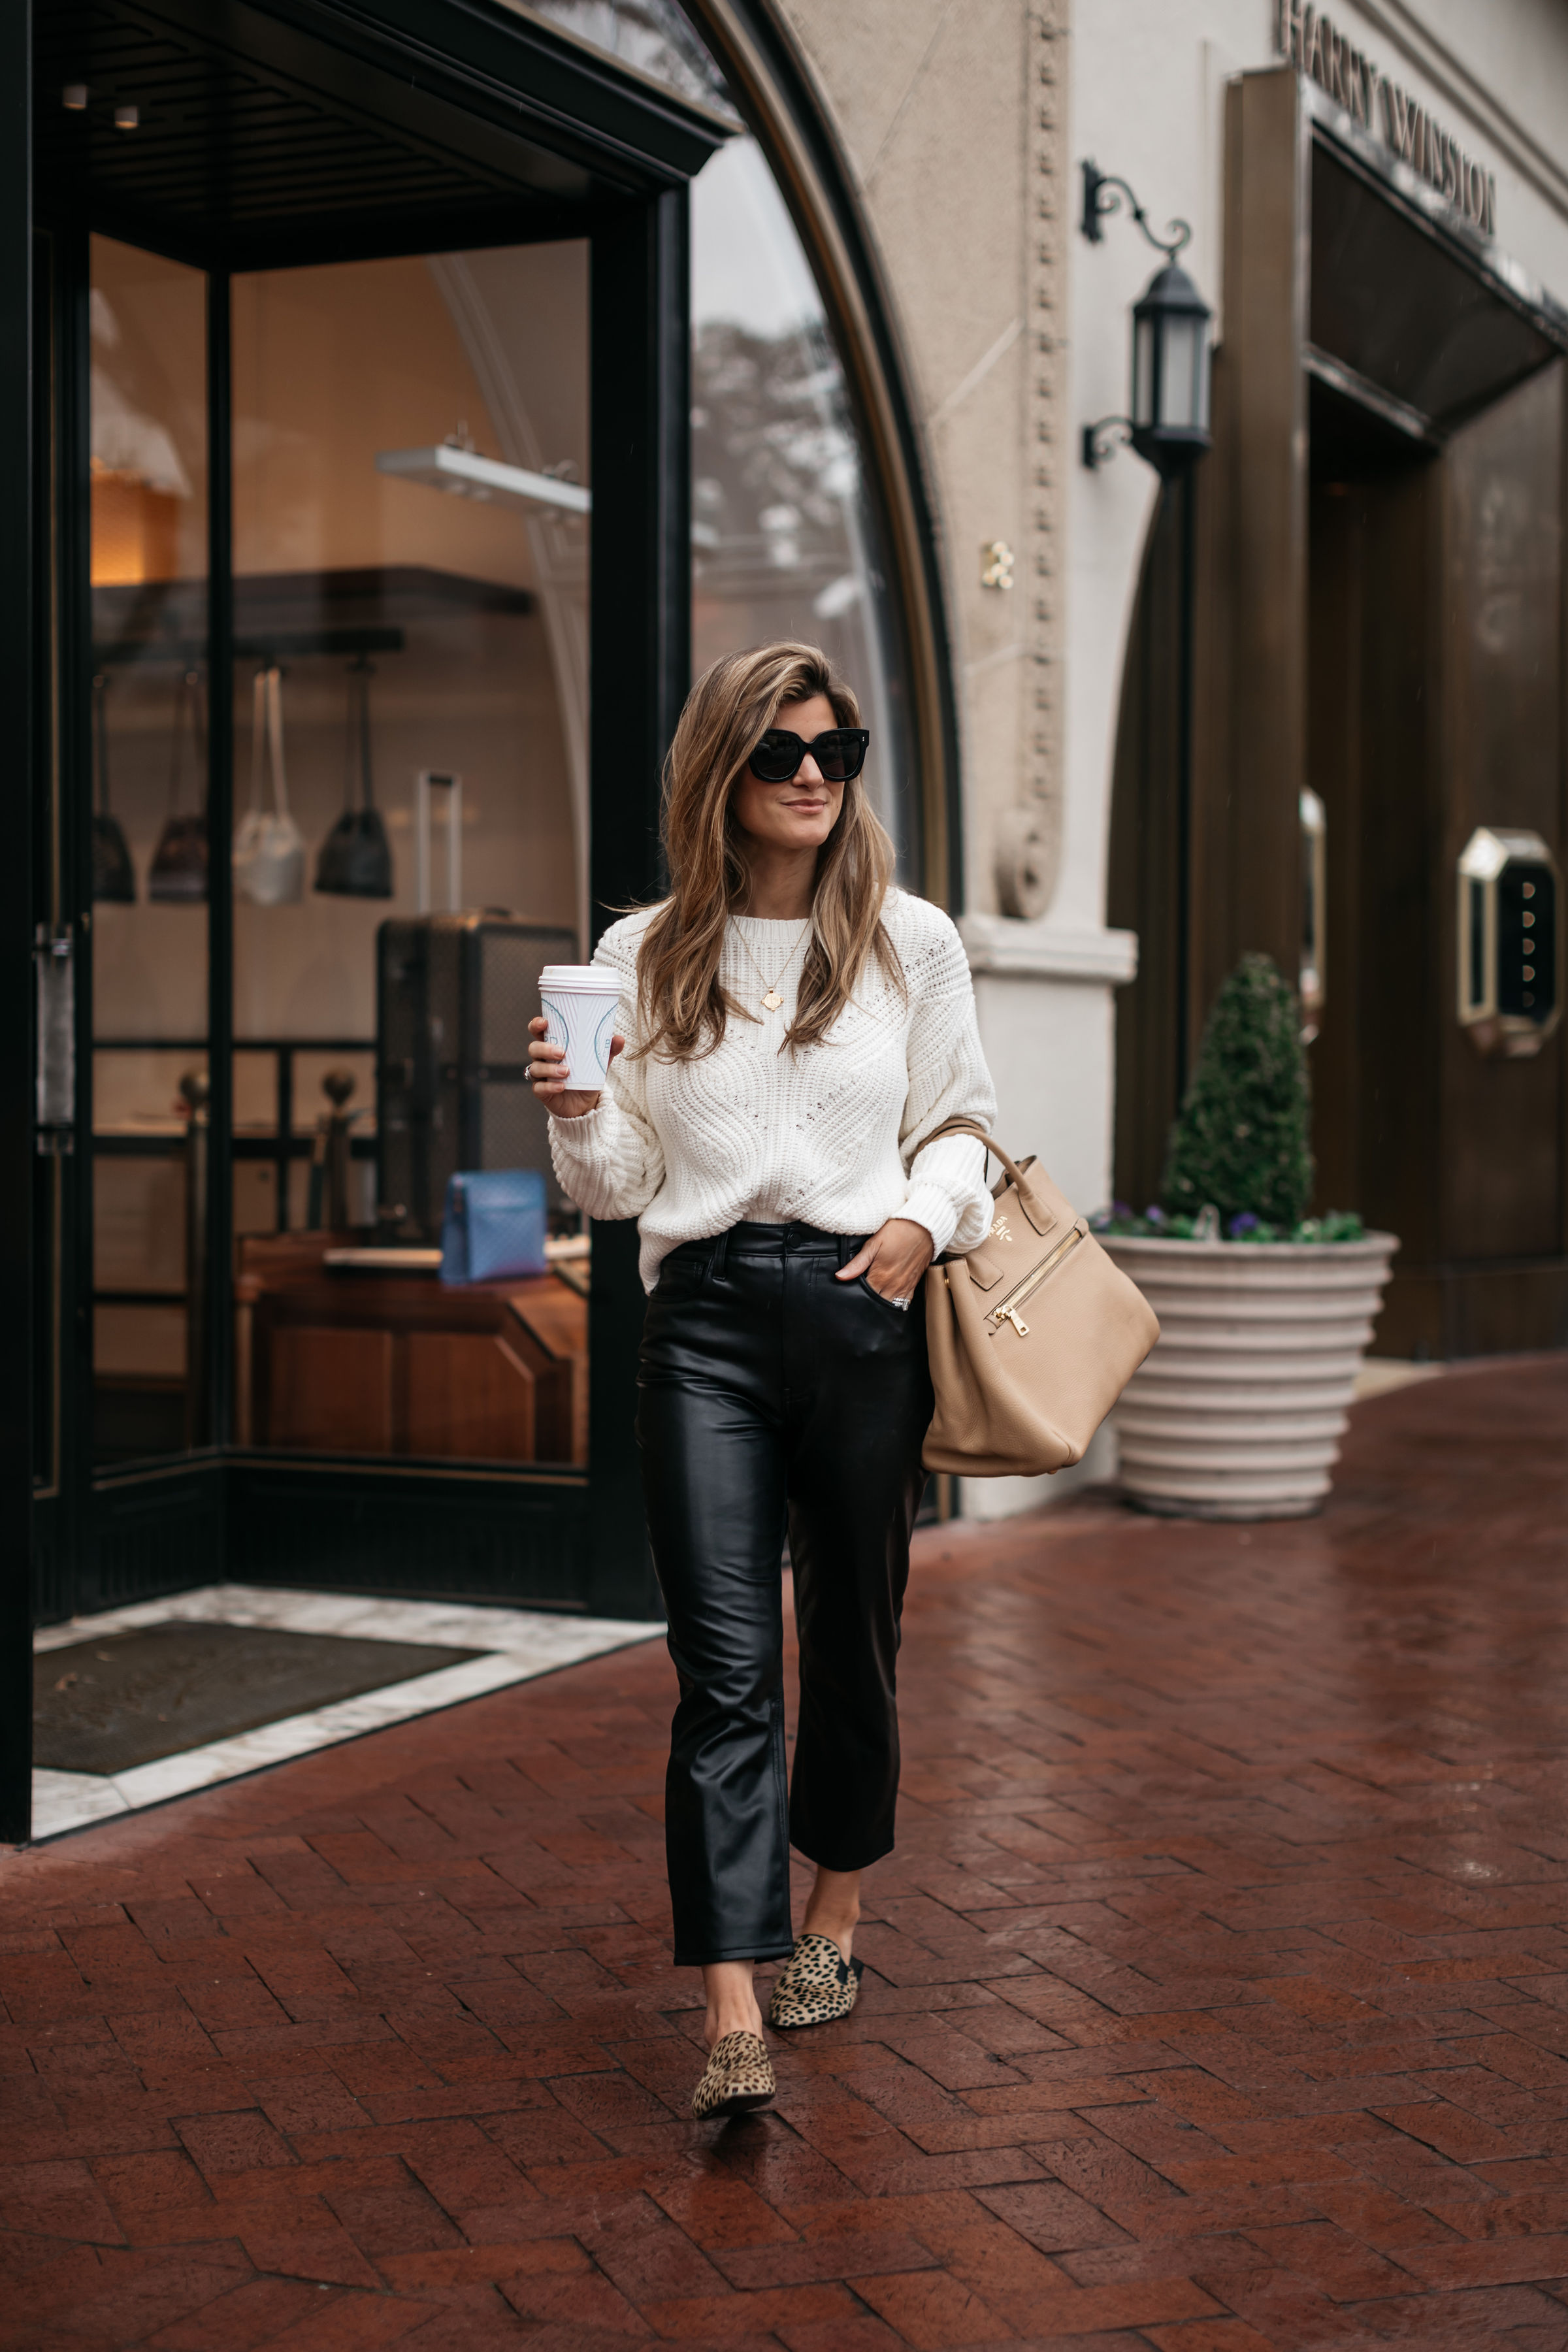 Stylish Black Leather Pants for Fall. How to Wear Black Leather